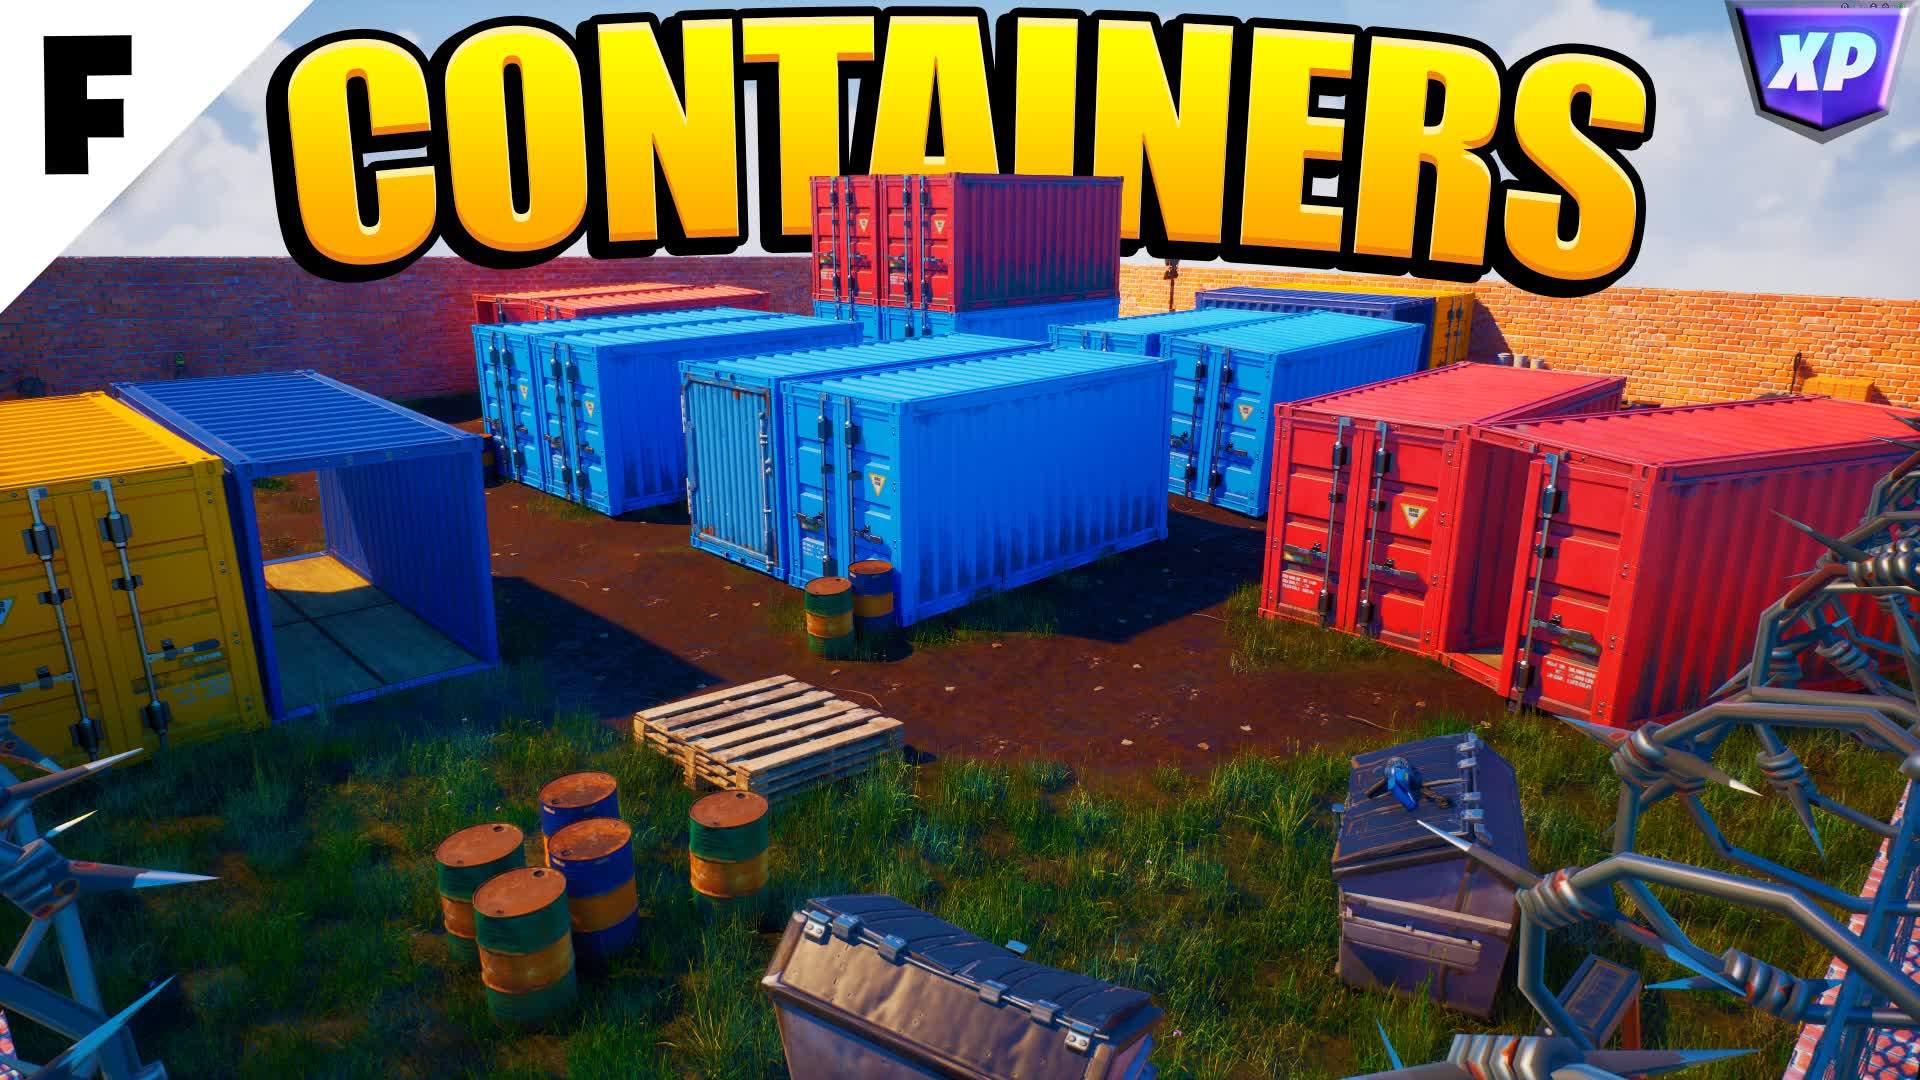 🚢Containers🚢